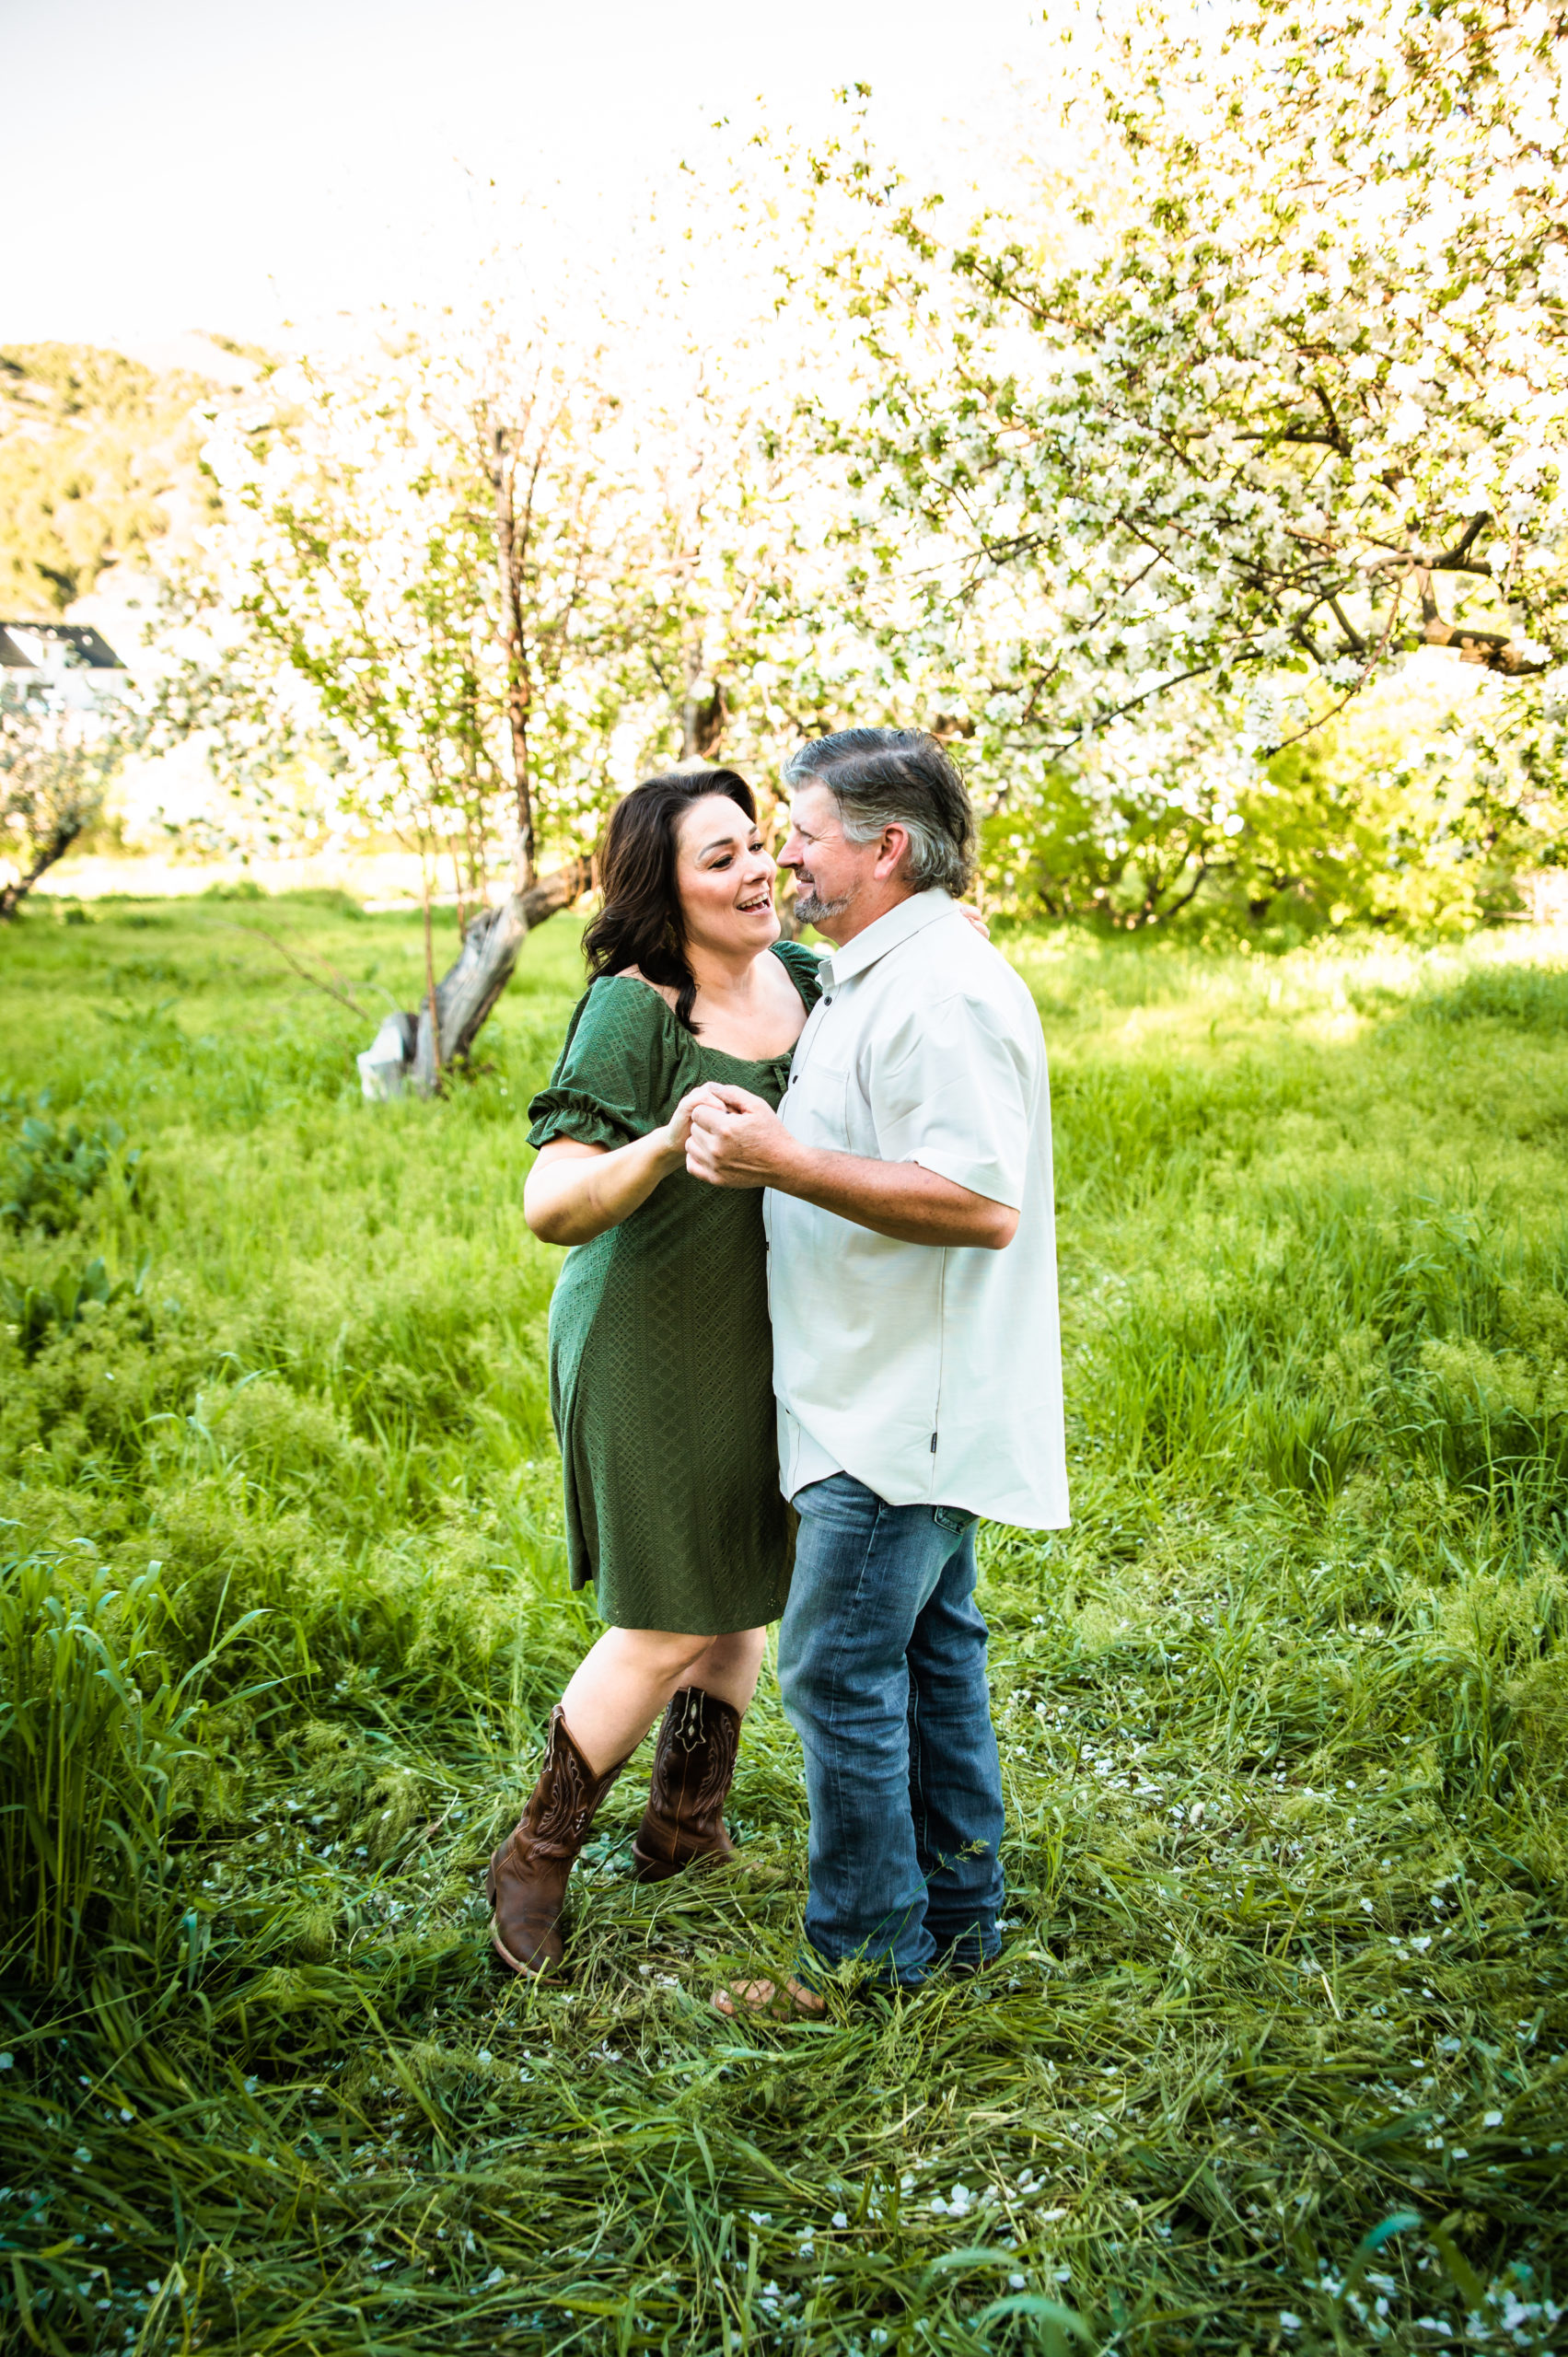 woman wearing green dress dancing in a grassy field with man wearing button down shirt, jeans and boots during Western Sunset Engagements